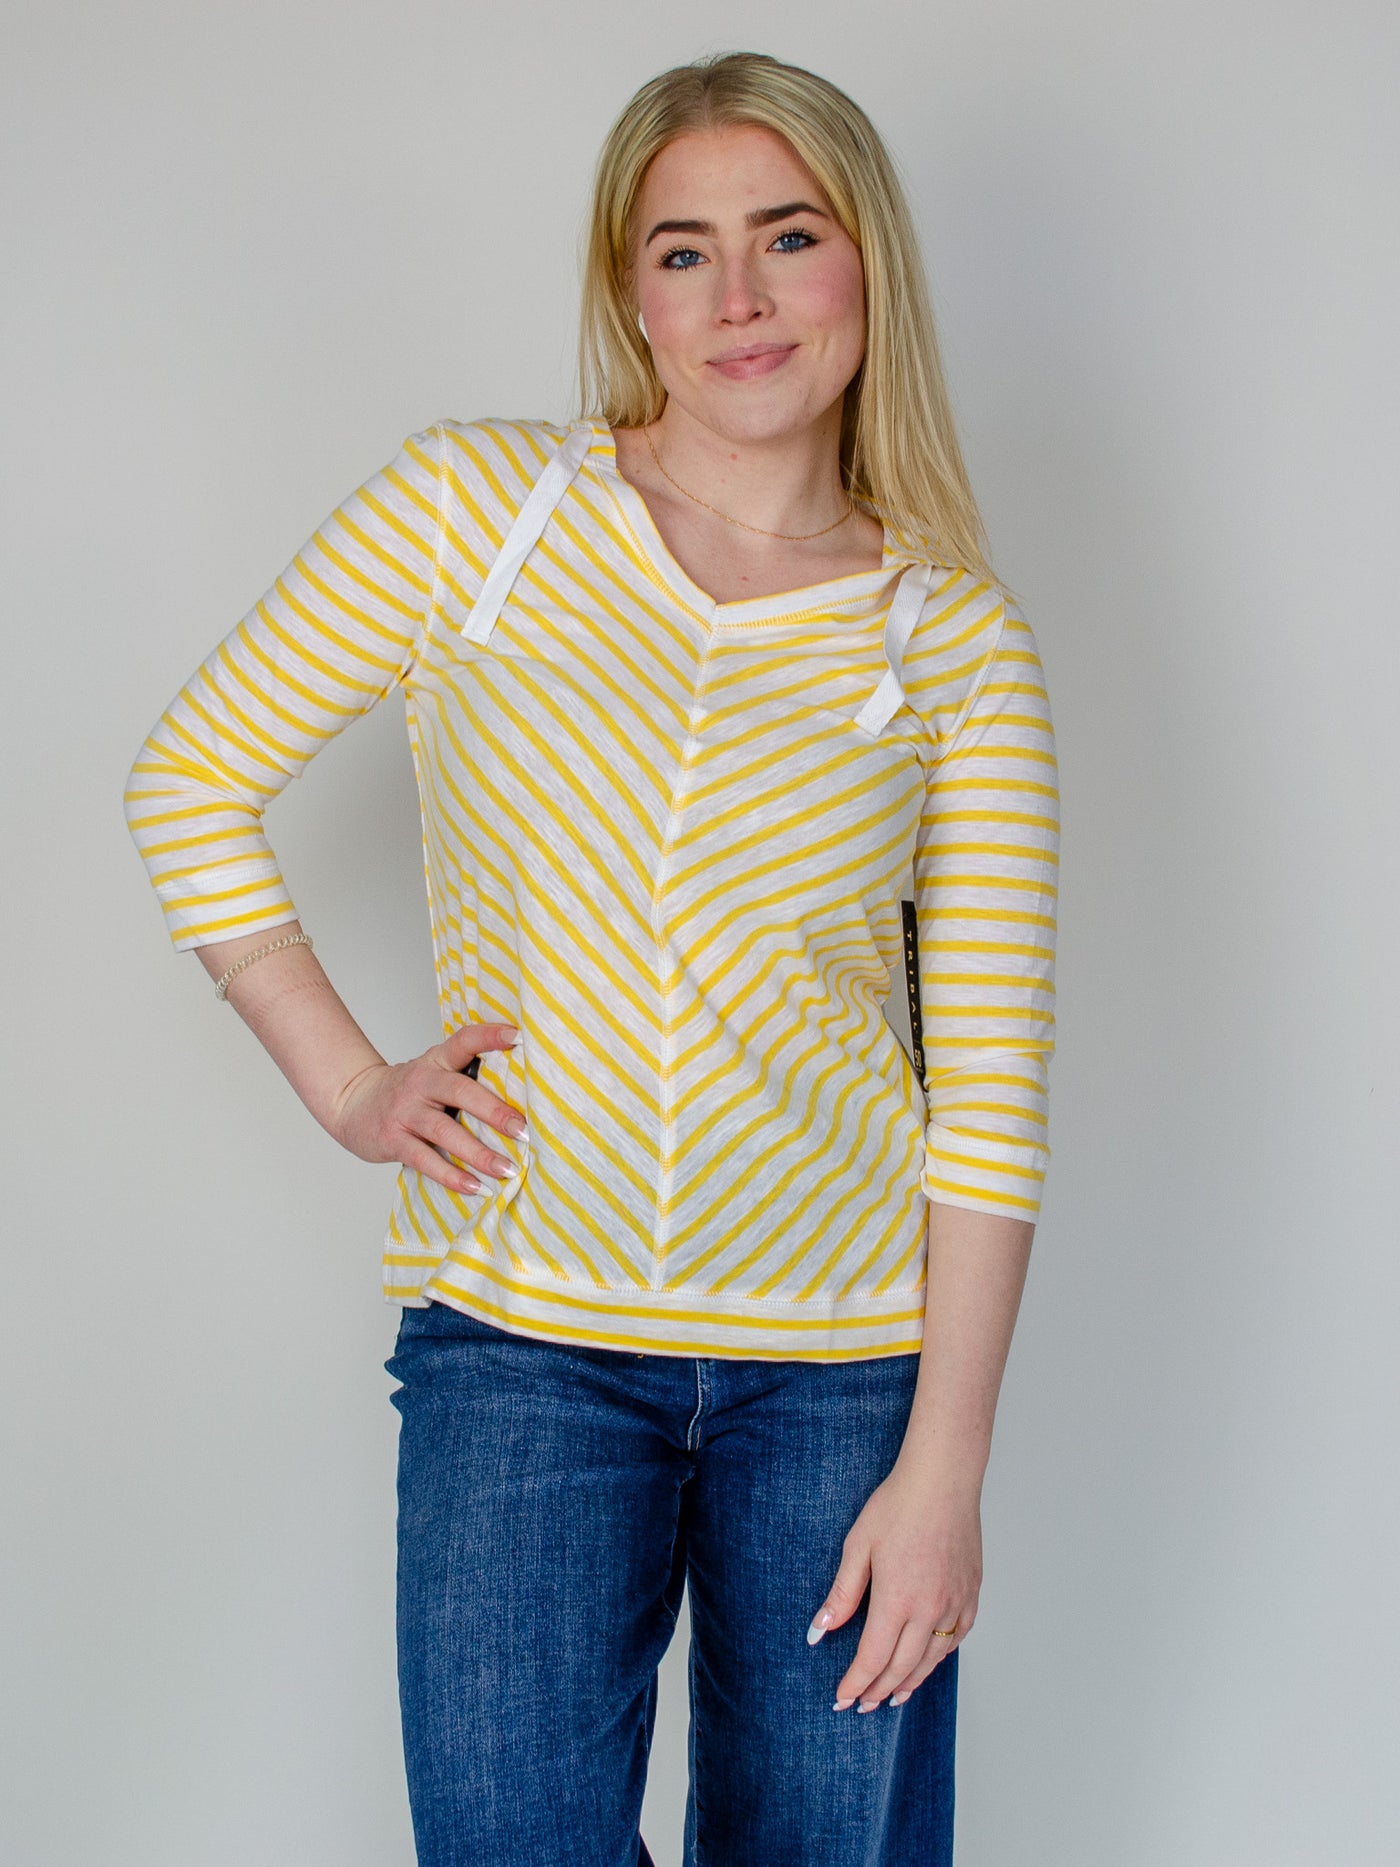 Model is wearing a striped yellow and white quarter sleeve hooded pullover with white drawstring details. Top is paired with dark wash blue jeans. 